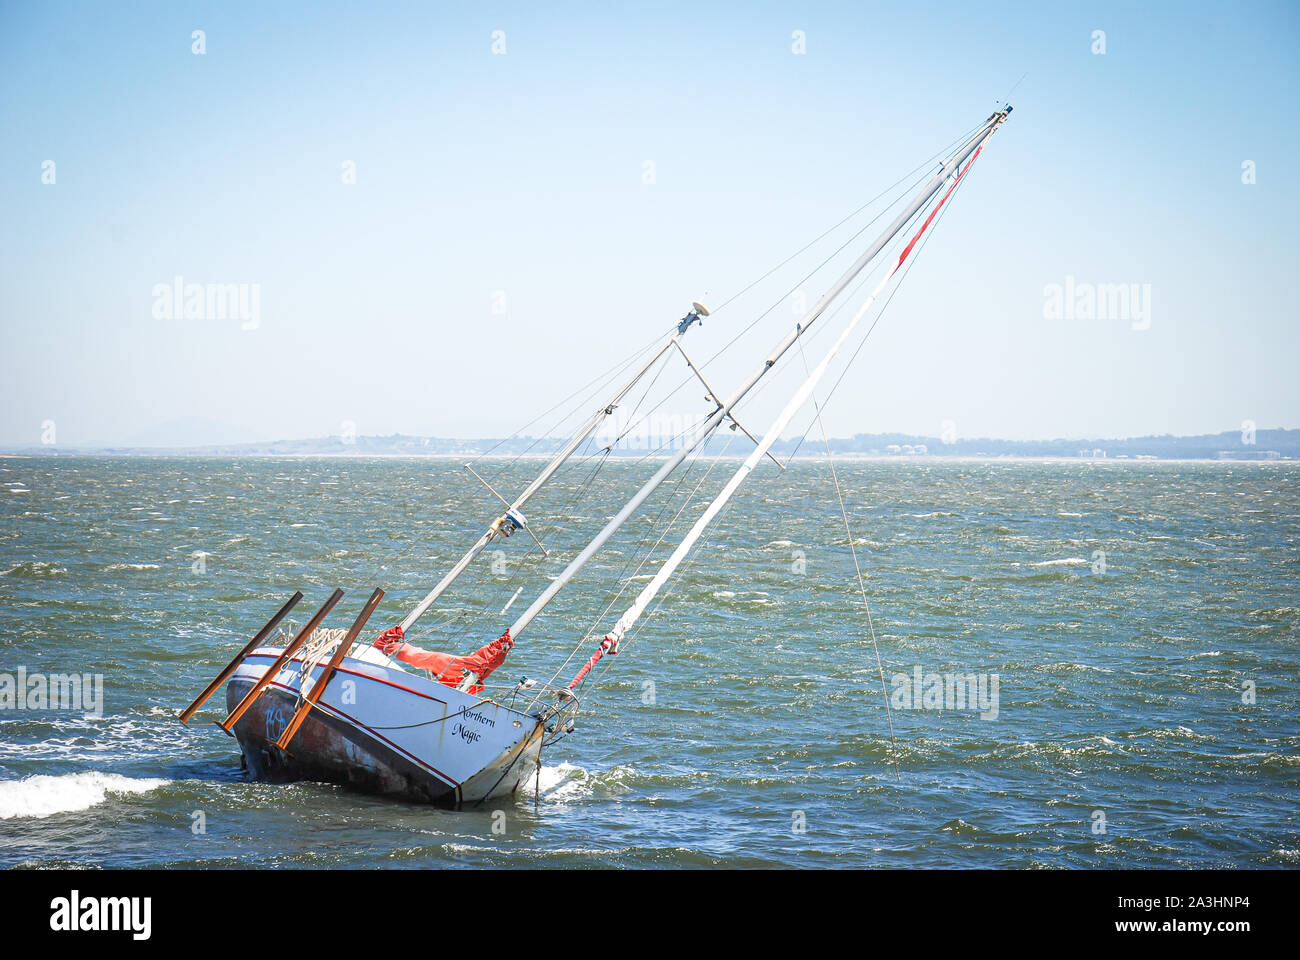 A sailboat on the coast of Punta de Este in front of the center of the Stock Photo